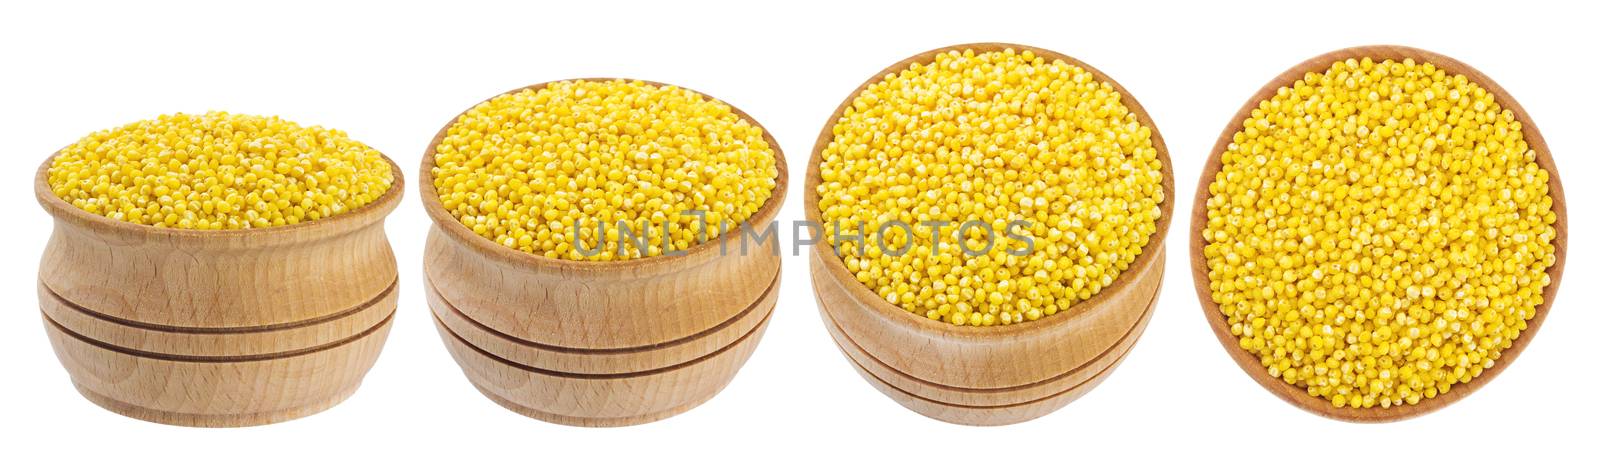 Millet bowl isolated on white background by xamtiw